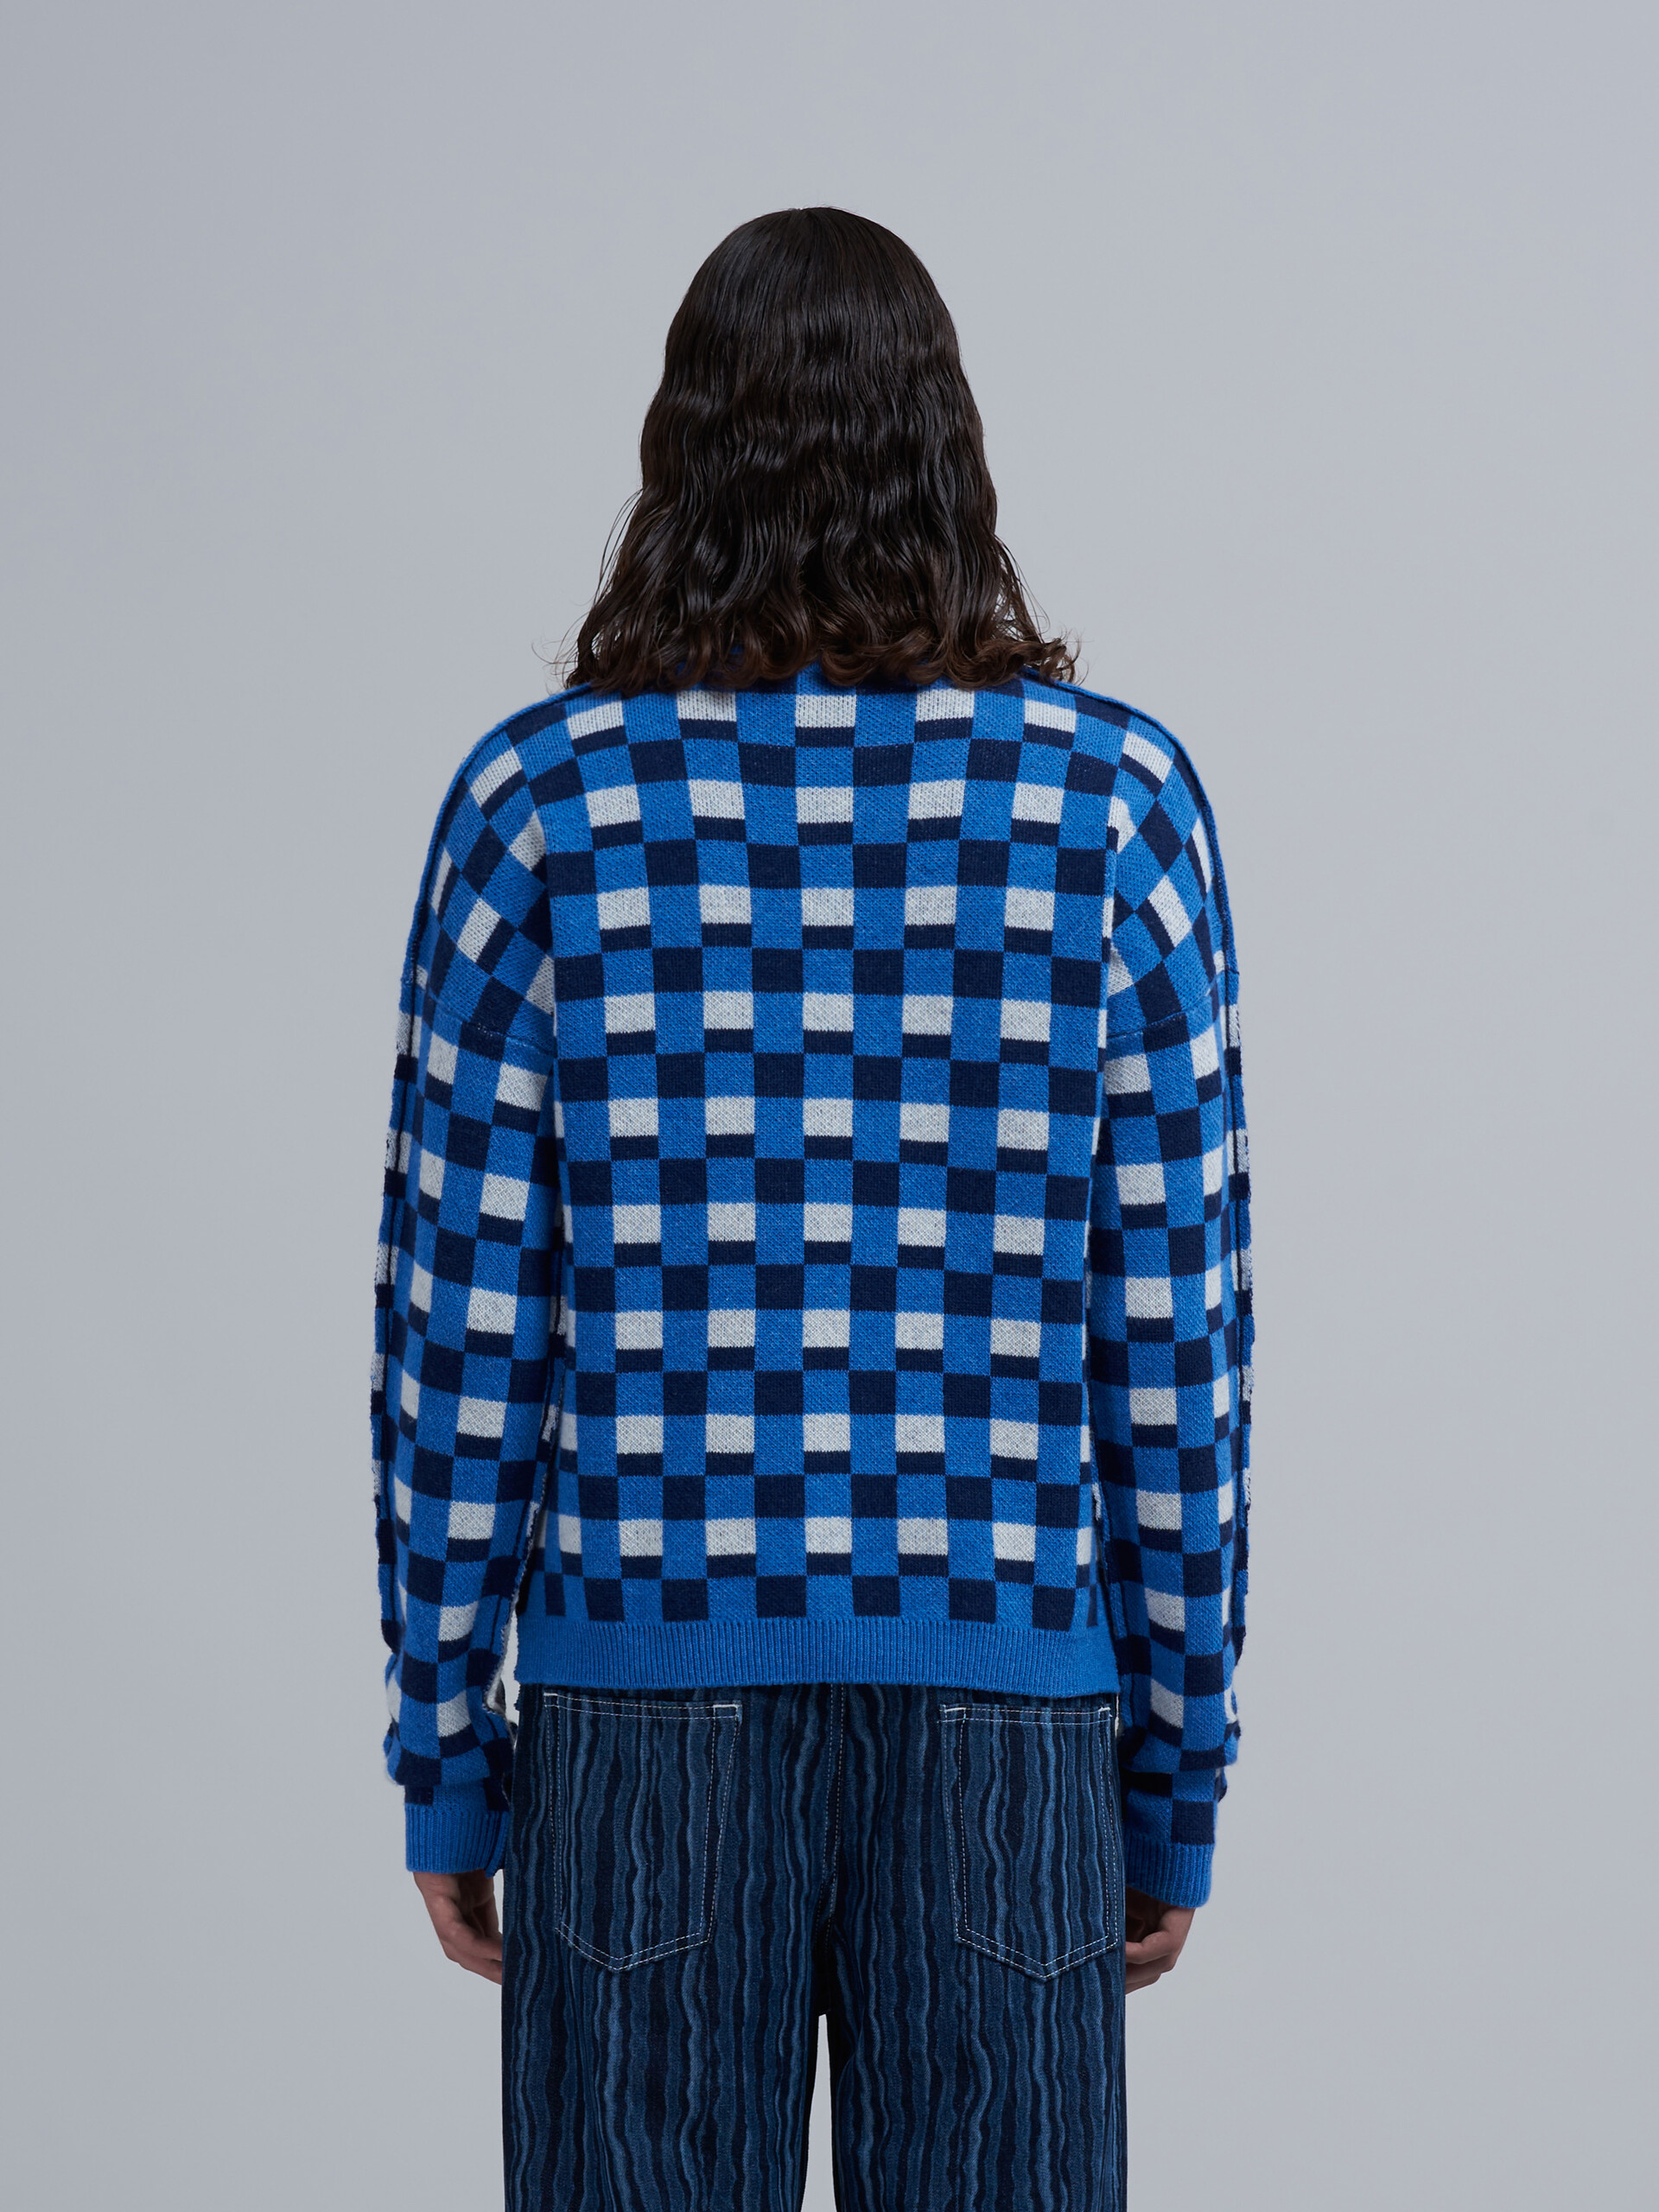 Blue and white crepe and Shetland wool sweater - Pullovers - Image 3